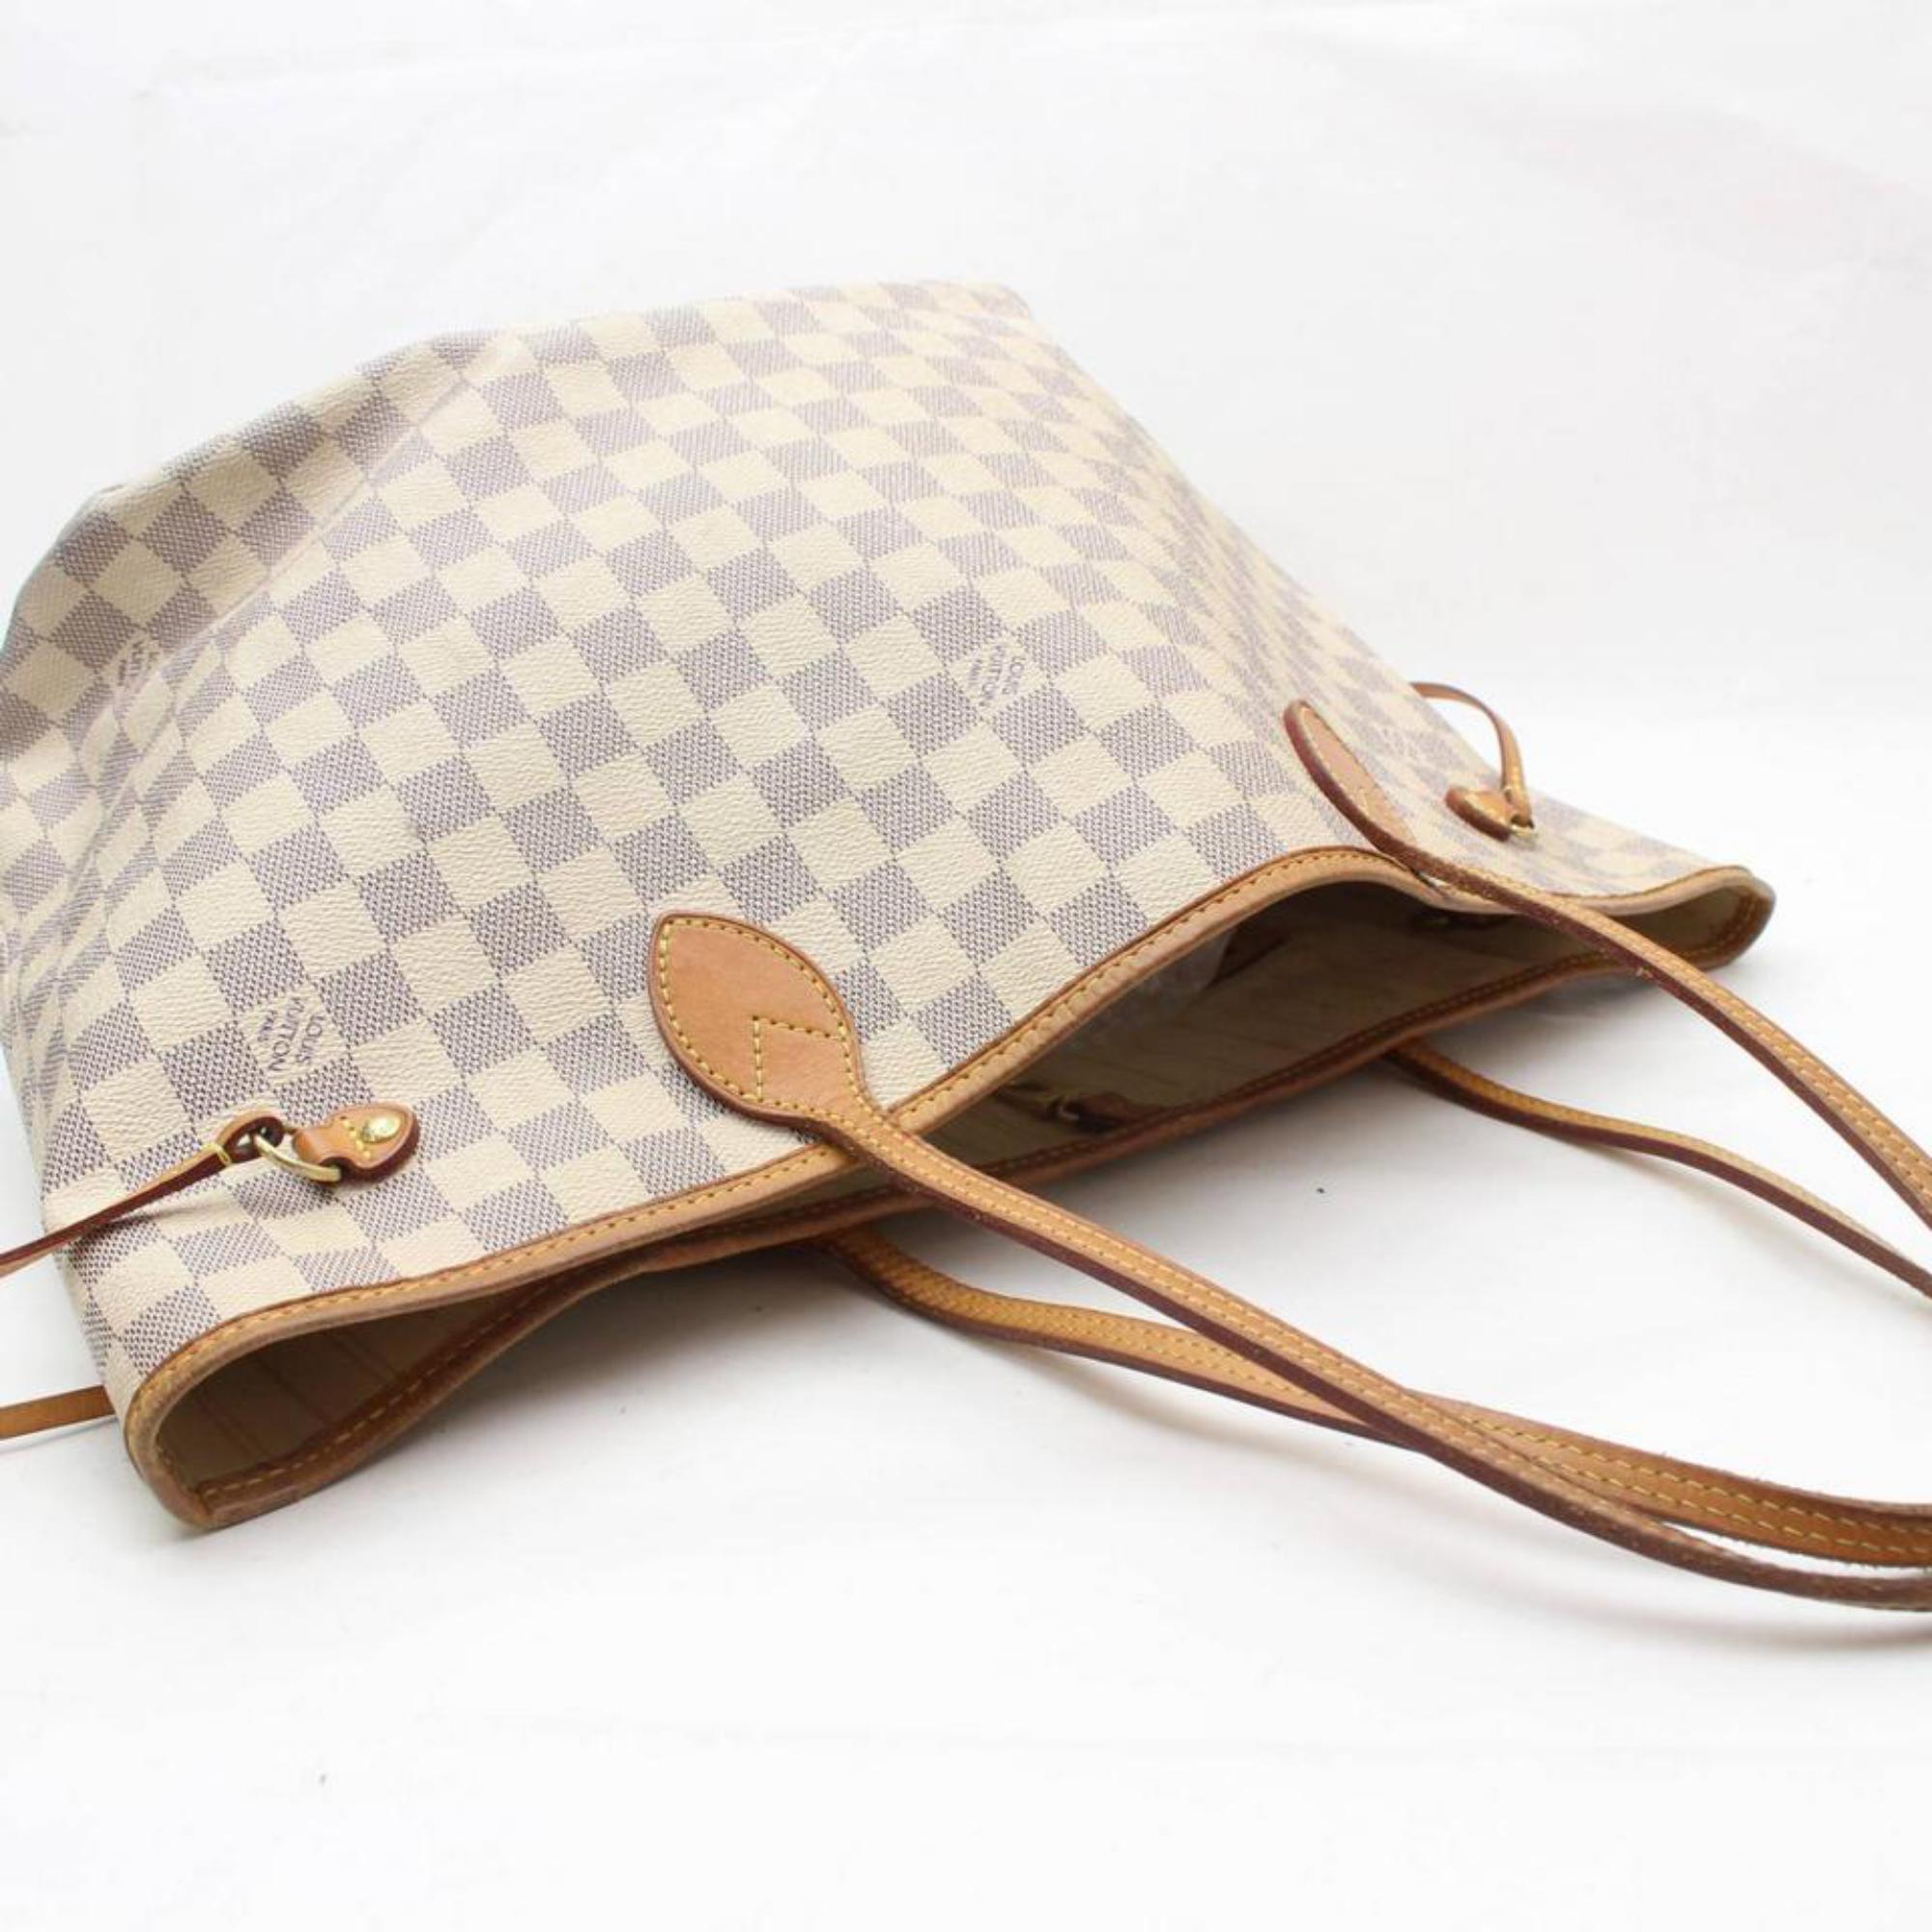 Louis Vuitton Neverfull Damier Azur Mm 868790 White Coated Canvas Tote For Sale 1